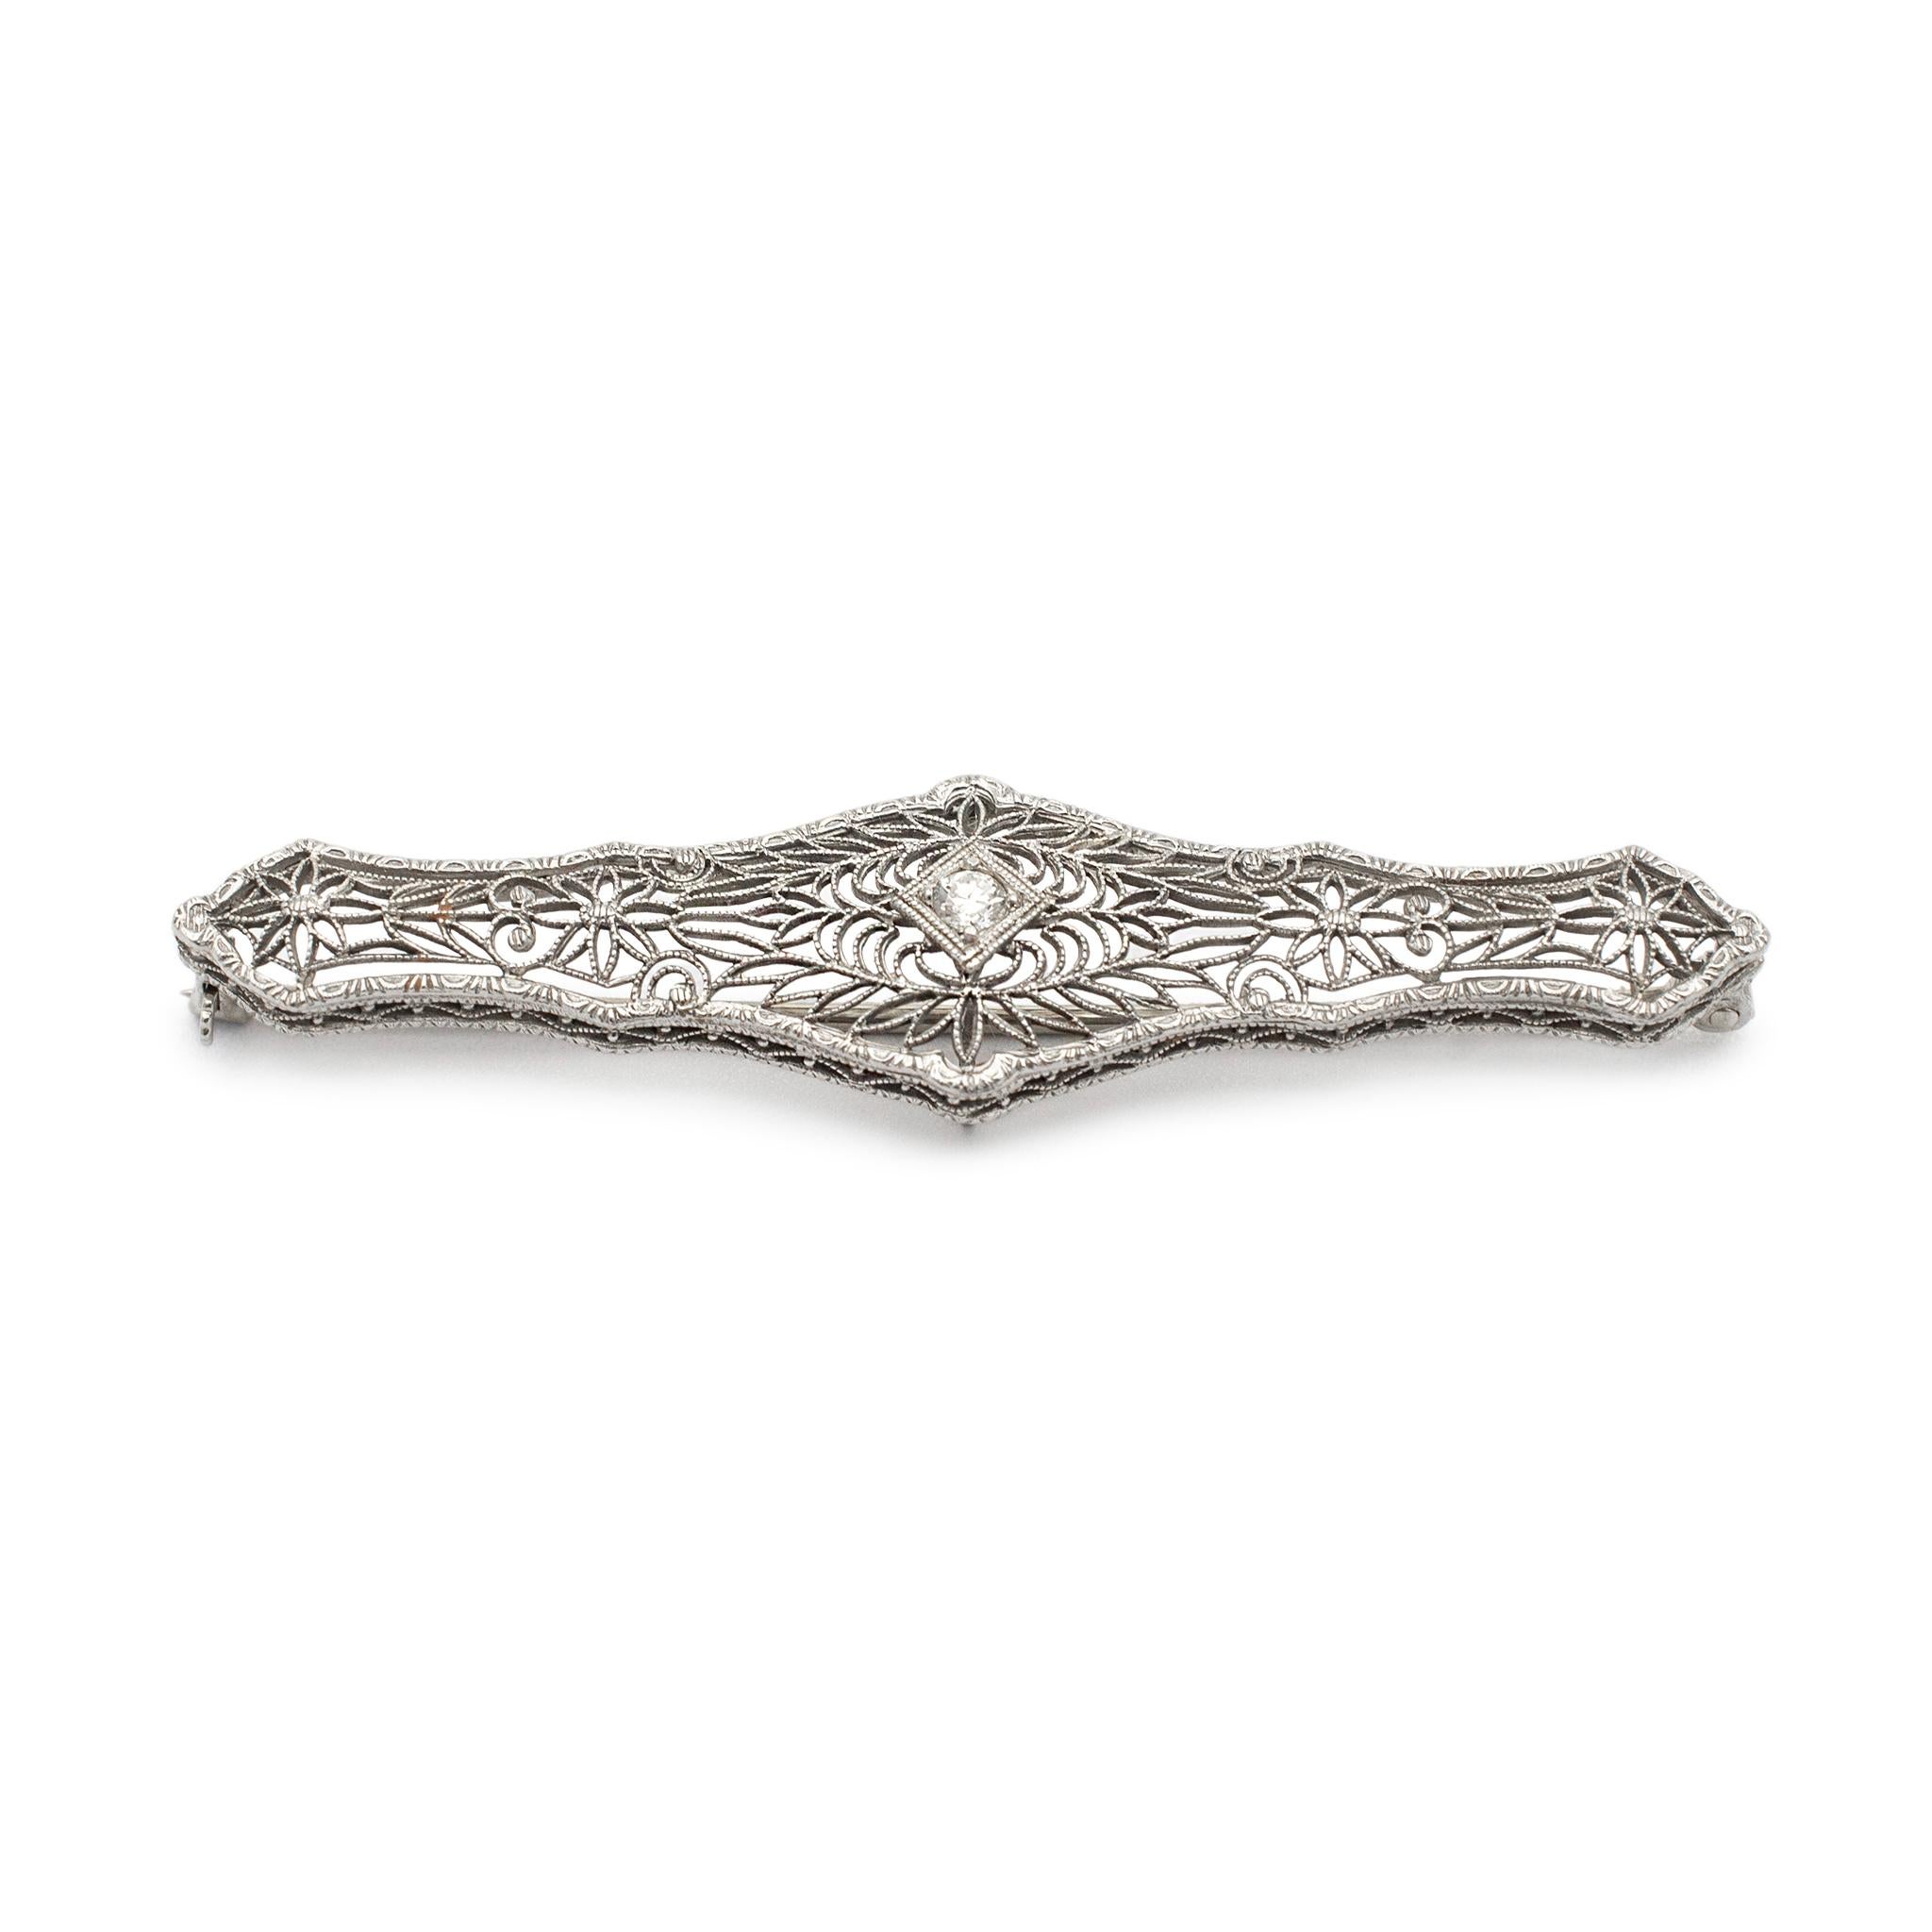 Vintage Platinum & 14K White Gold Filigreed Diamond Brooch In Excellent Condition For Sale In Houston, TX